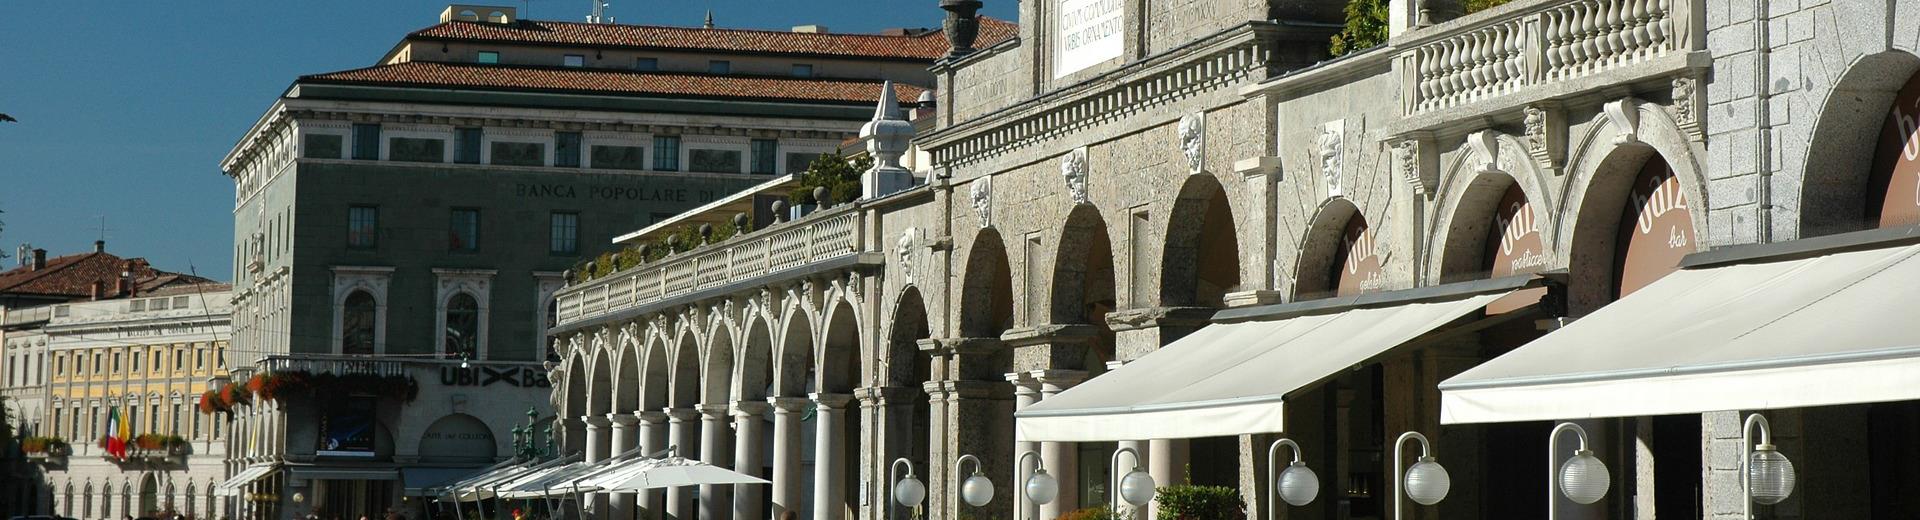 Find out what you can do in Bergamo: shopping, art, relax, taste good food and much more! Book now 4 star centrally located BW Hotel Piemontese, Bergamo!